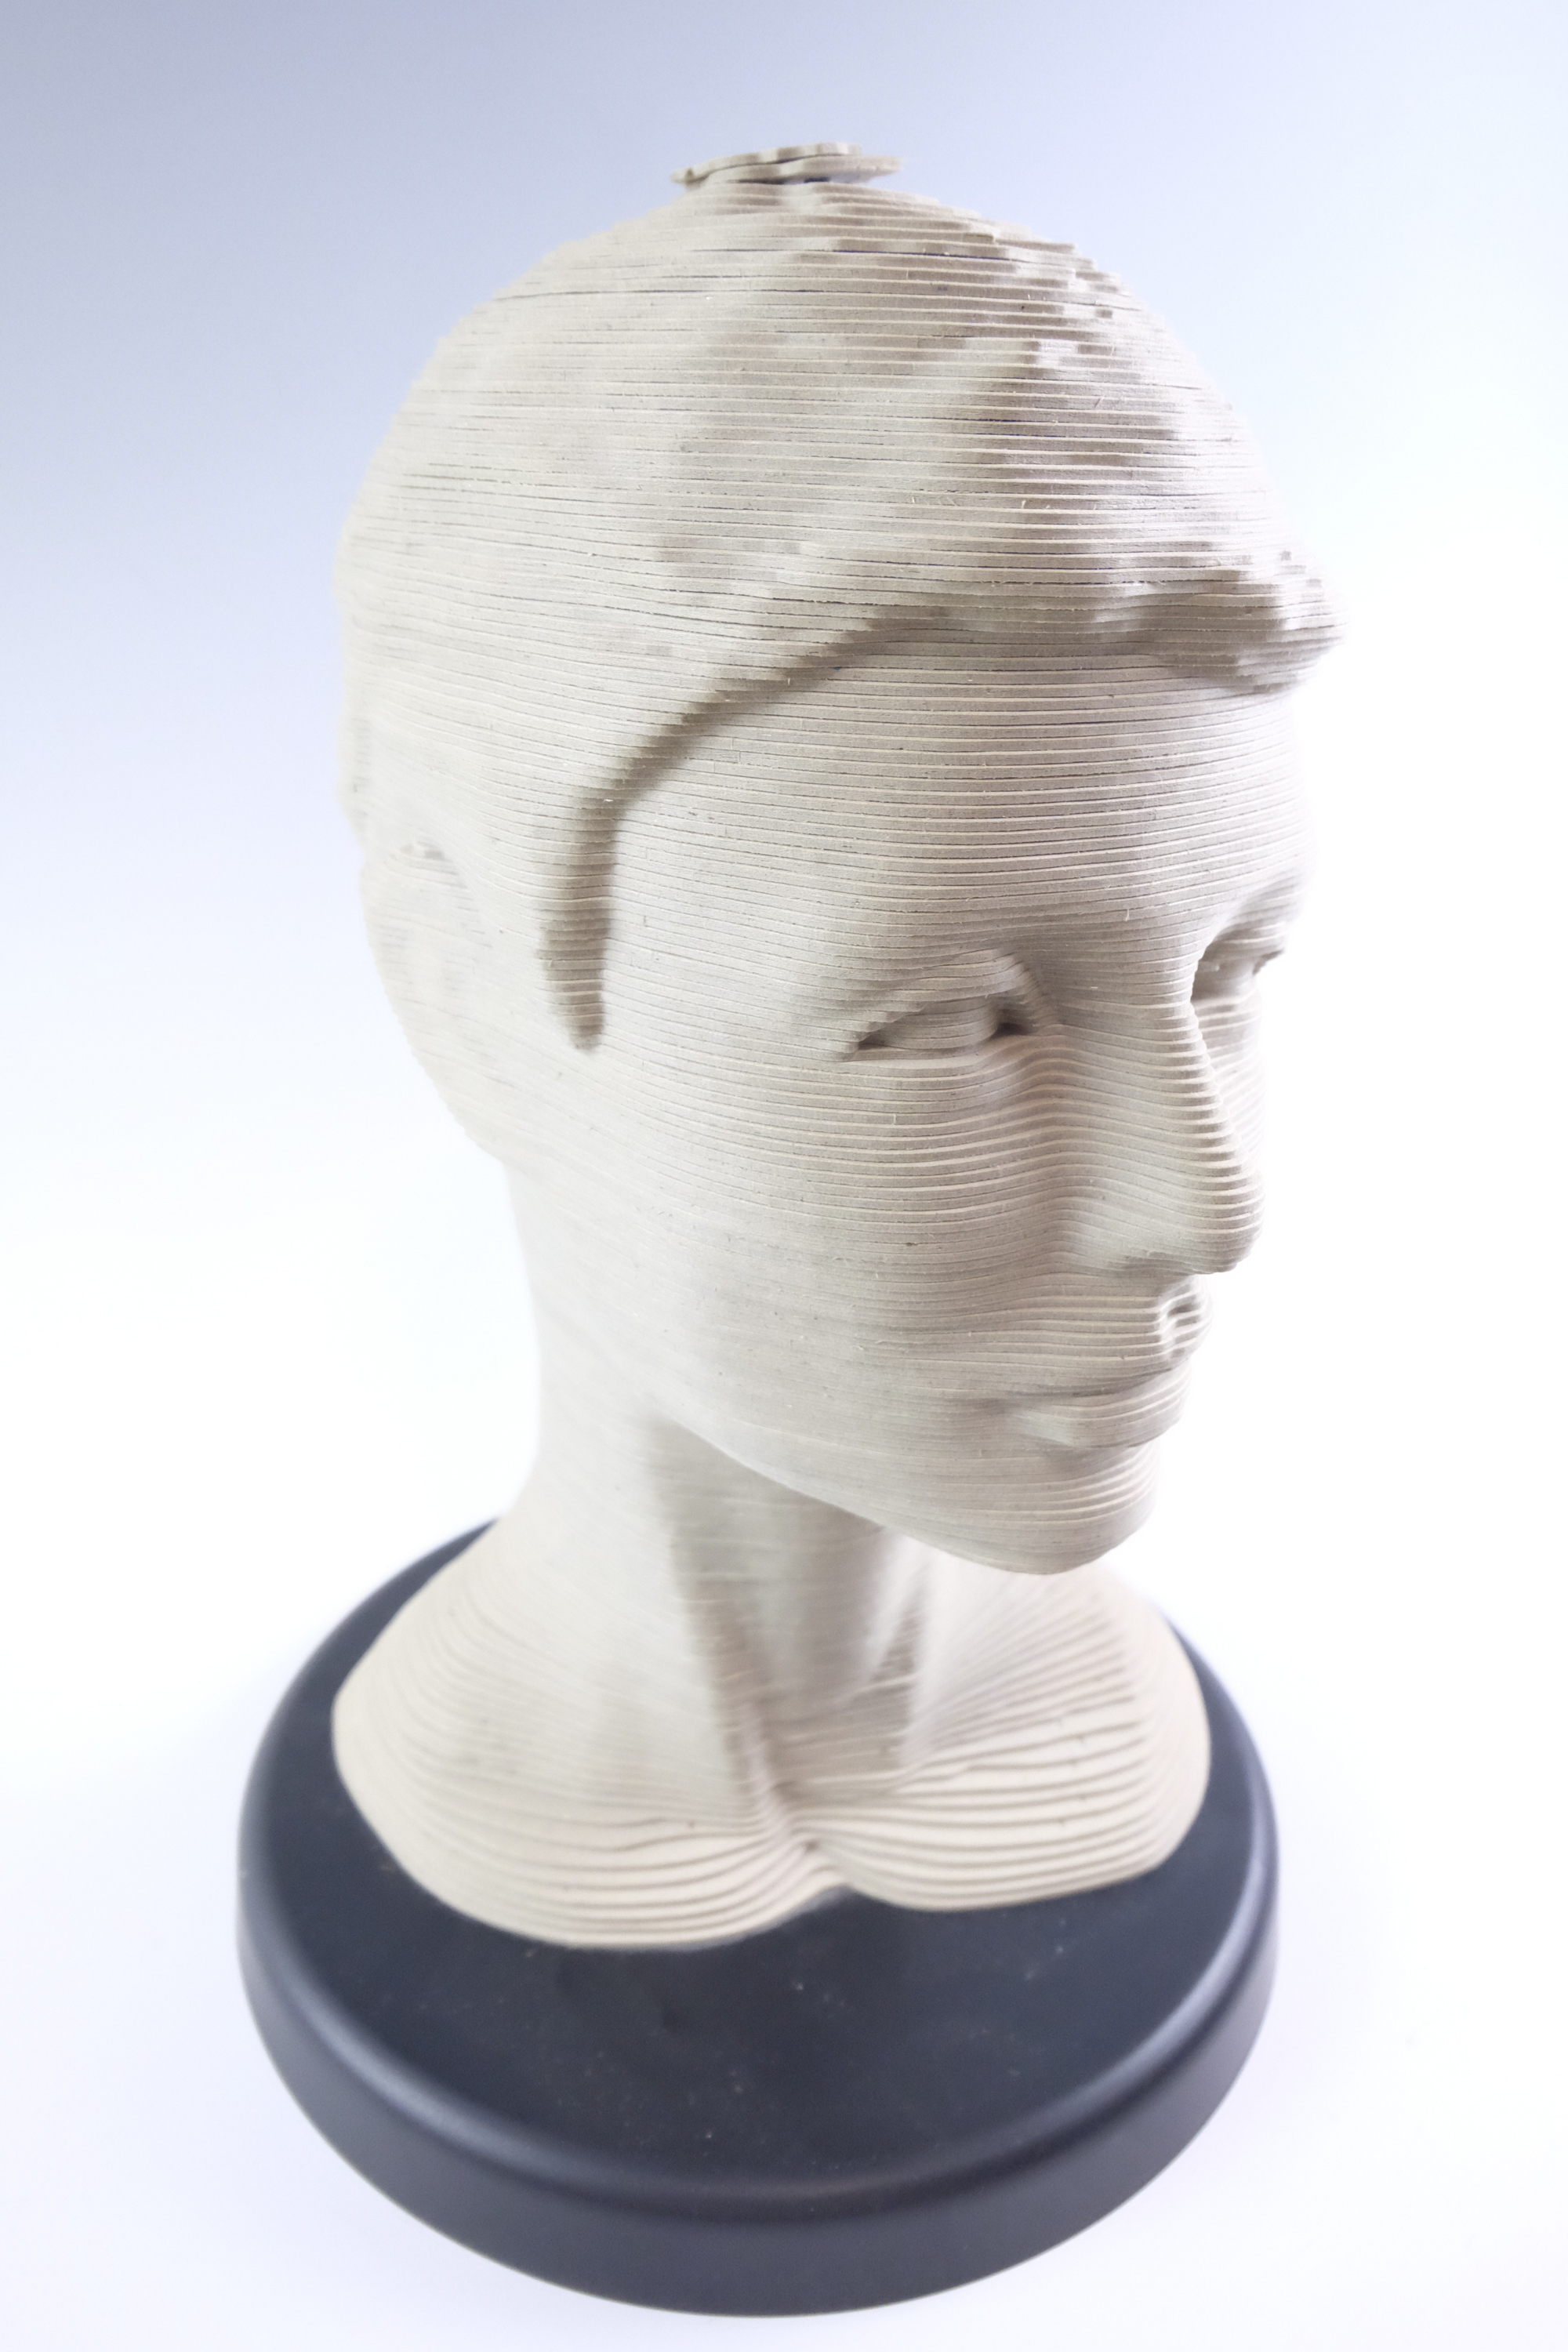 A life-sized female bust modelled using lamellae of profiled card, 37 cm - Image 2 of 3